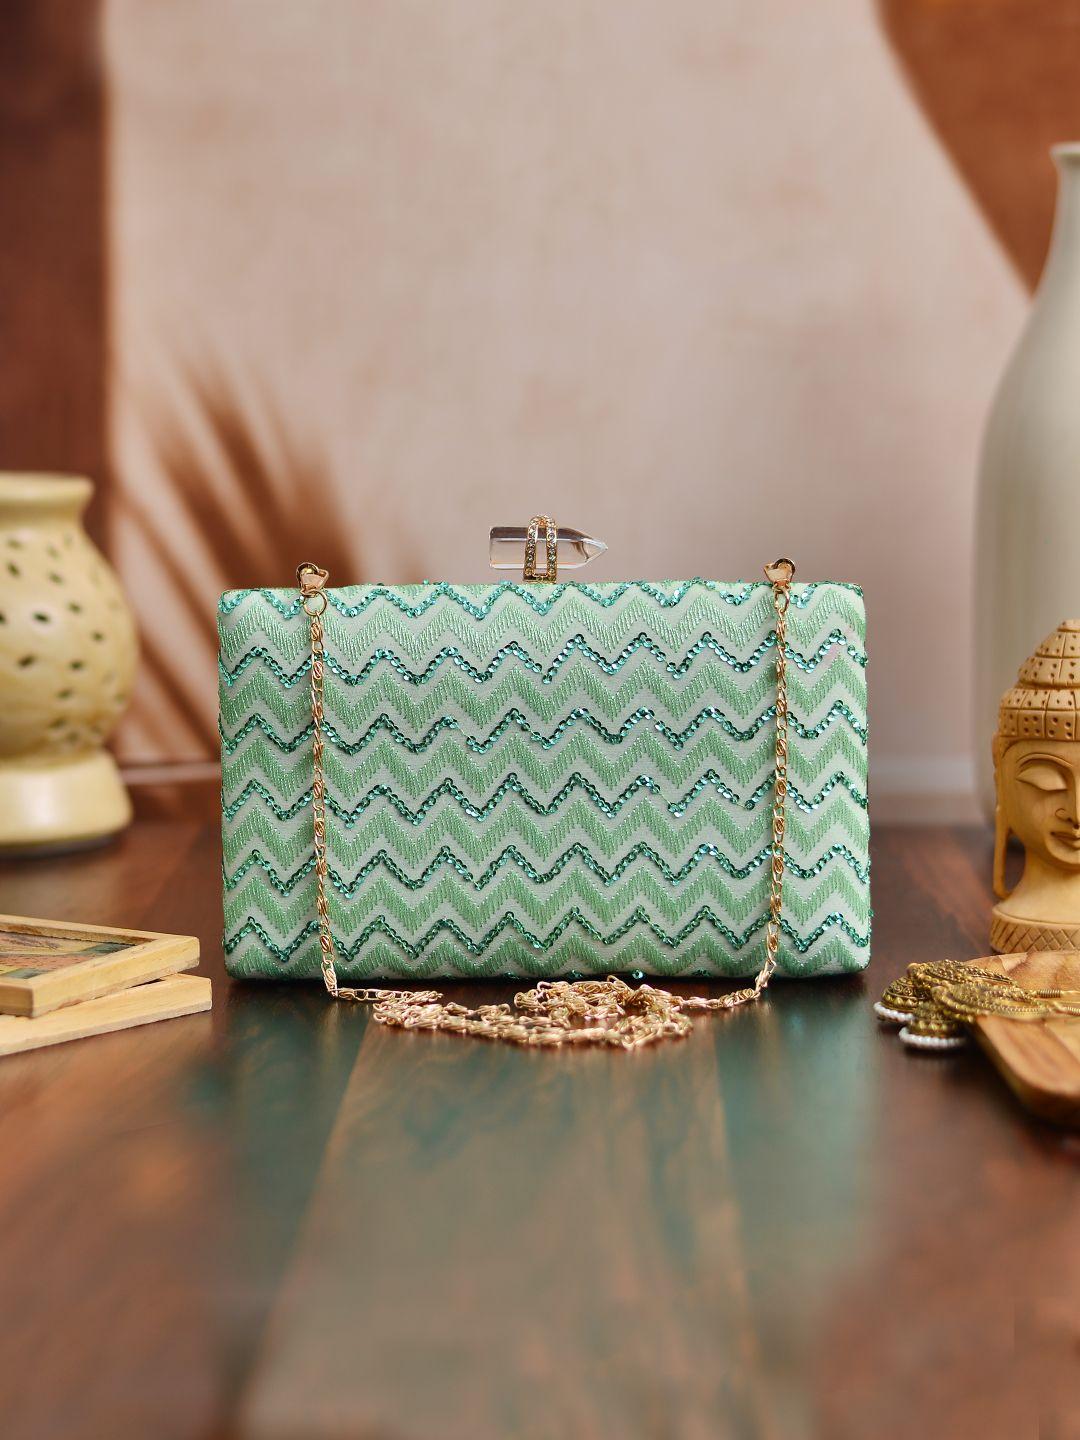 artklim turquoise blue & gold-toned embroidered box clutch